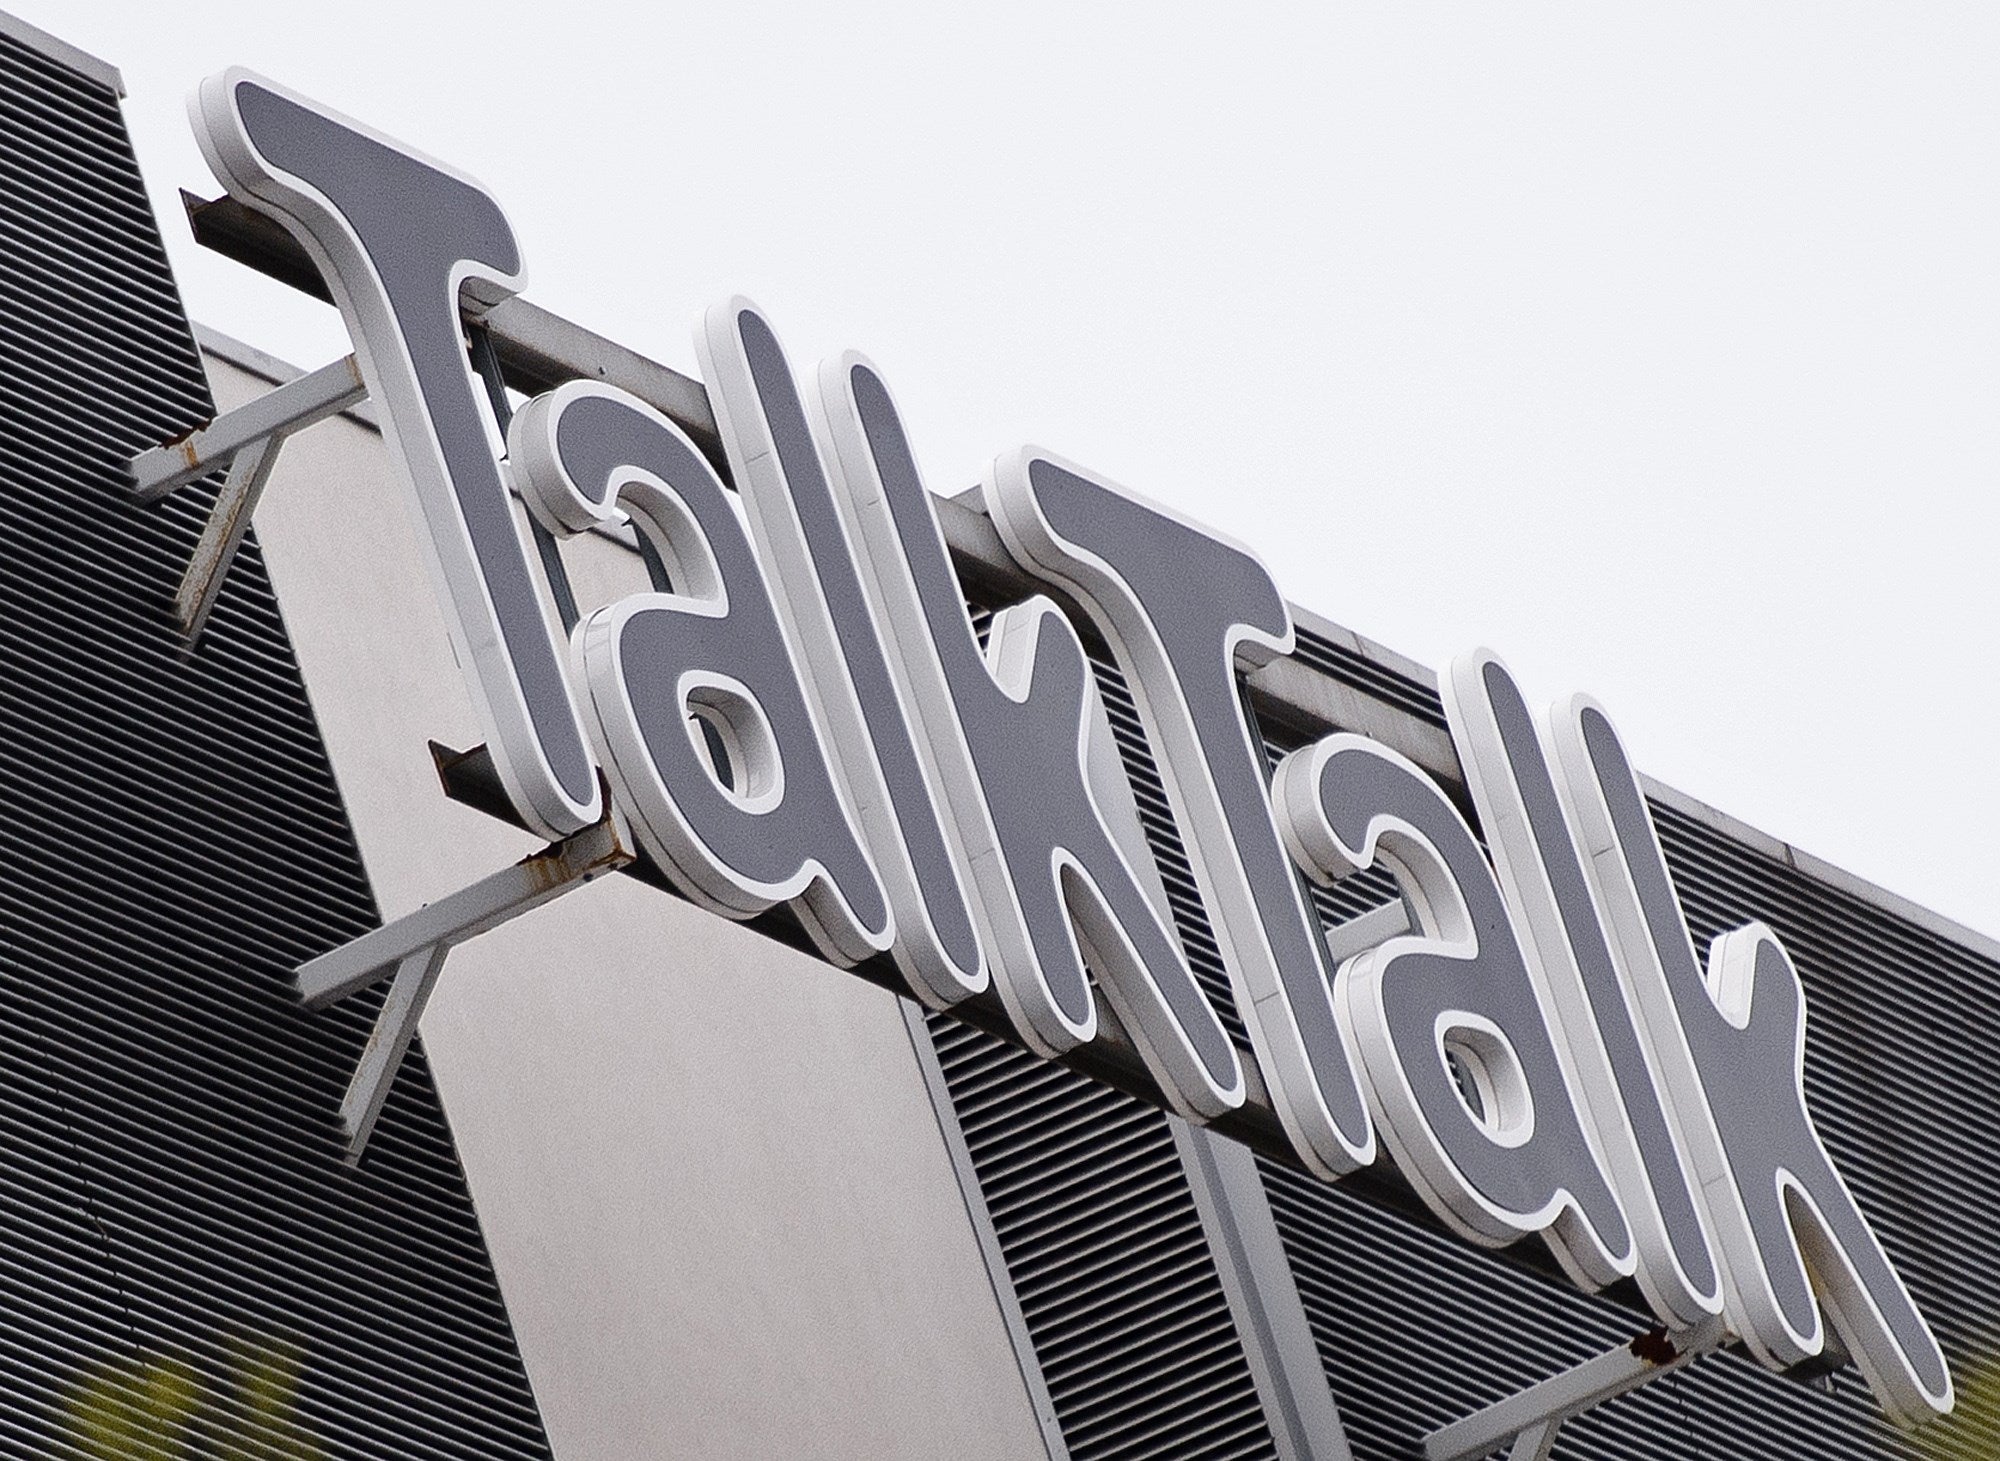 TalkTalk finished bottom of an approval ratings survey by customers in Which? magazine